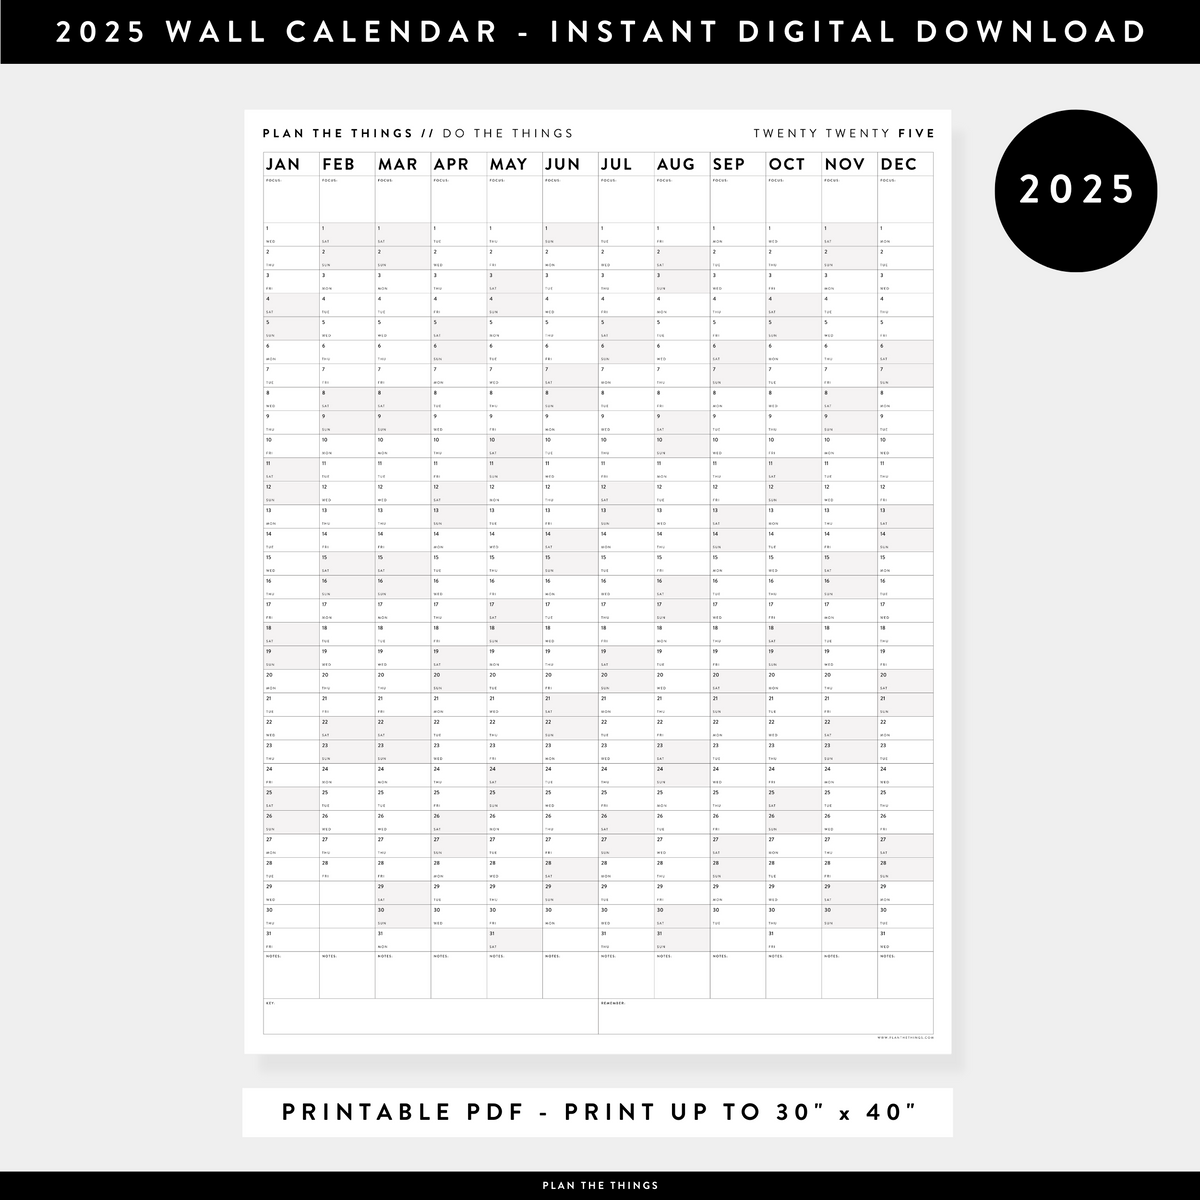 PRINTABLE VERTICAL 2025 WALL CALENDAR WITH GRAY / GREY WEEKENDS INST